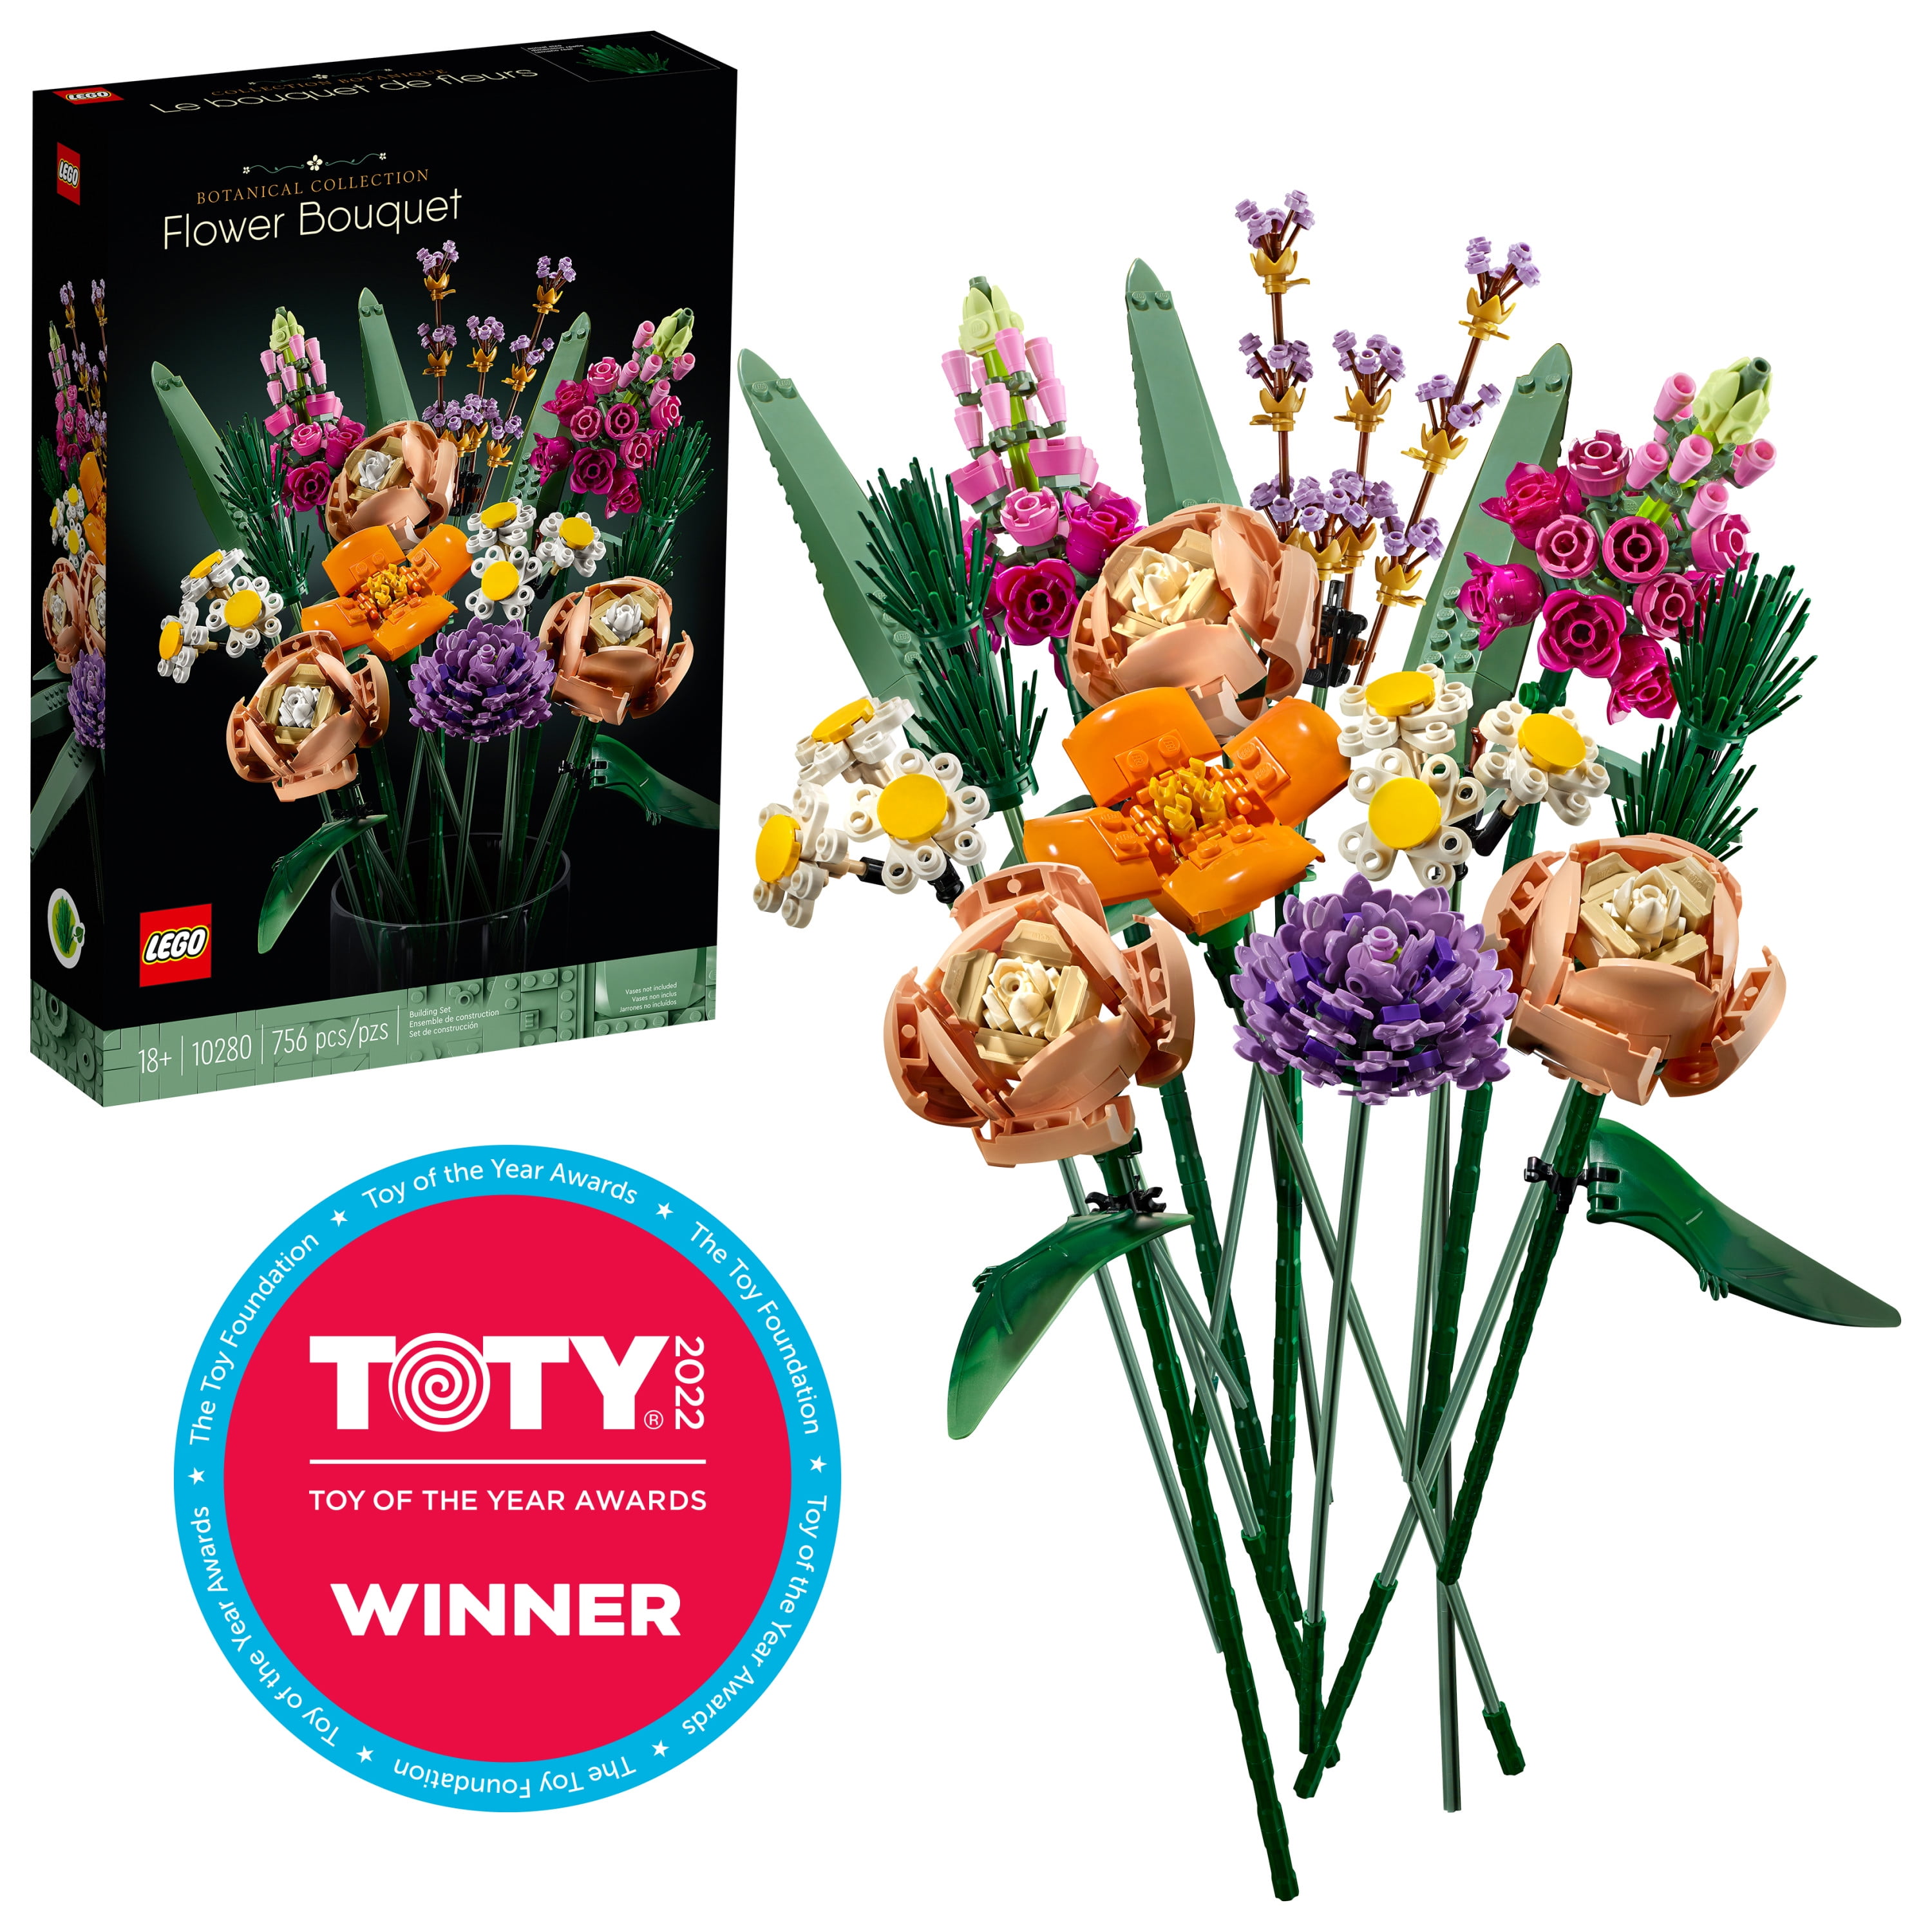 LEGO Icons Flower Bouquet 10280 Artificial Flowers, Set for Adults, Decorative Home Accessories, Mother's Day Gift, Anniversary Gift for Her and Him, Botanical Collection